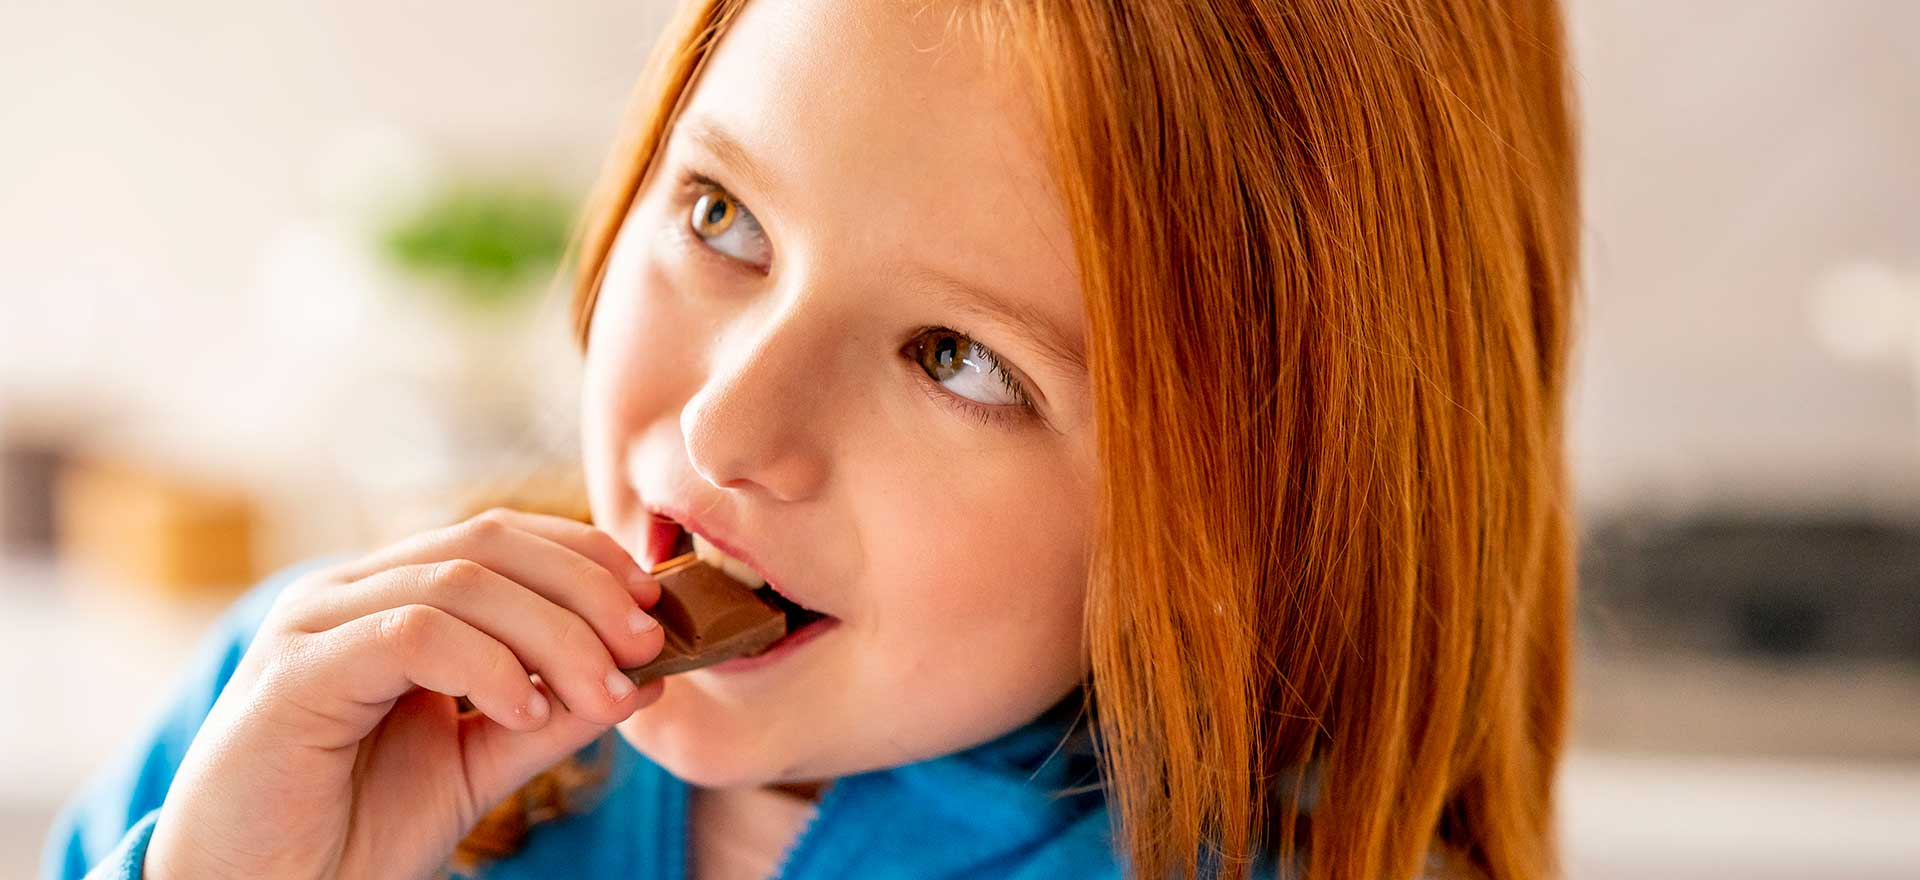 Little girl smiling while she eats a chocolate snack.